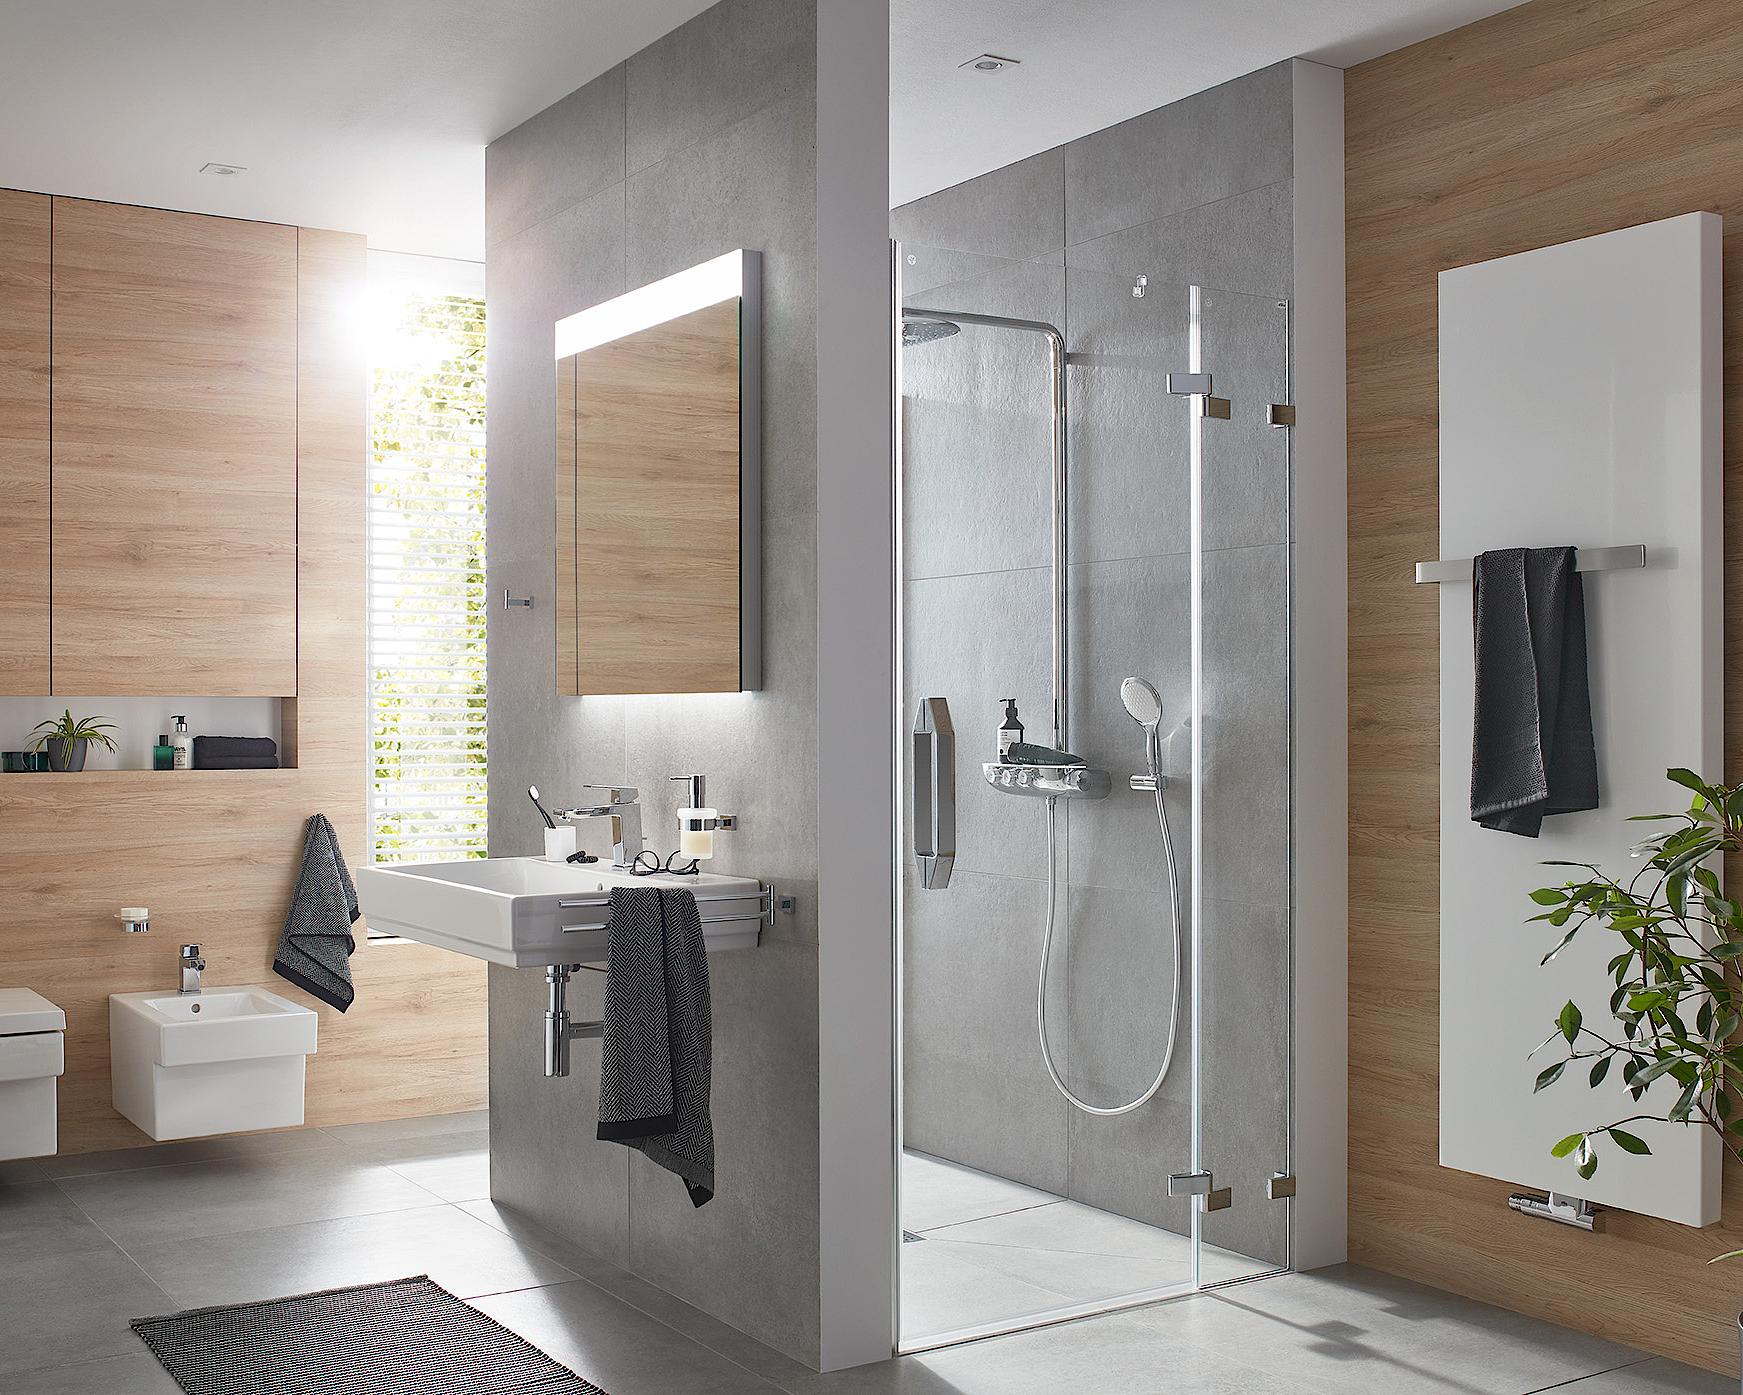 Kermi hinged shower enclosure, TUSCA single panel hinged door with fixed panel with wall hinge